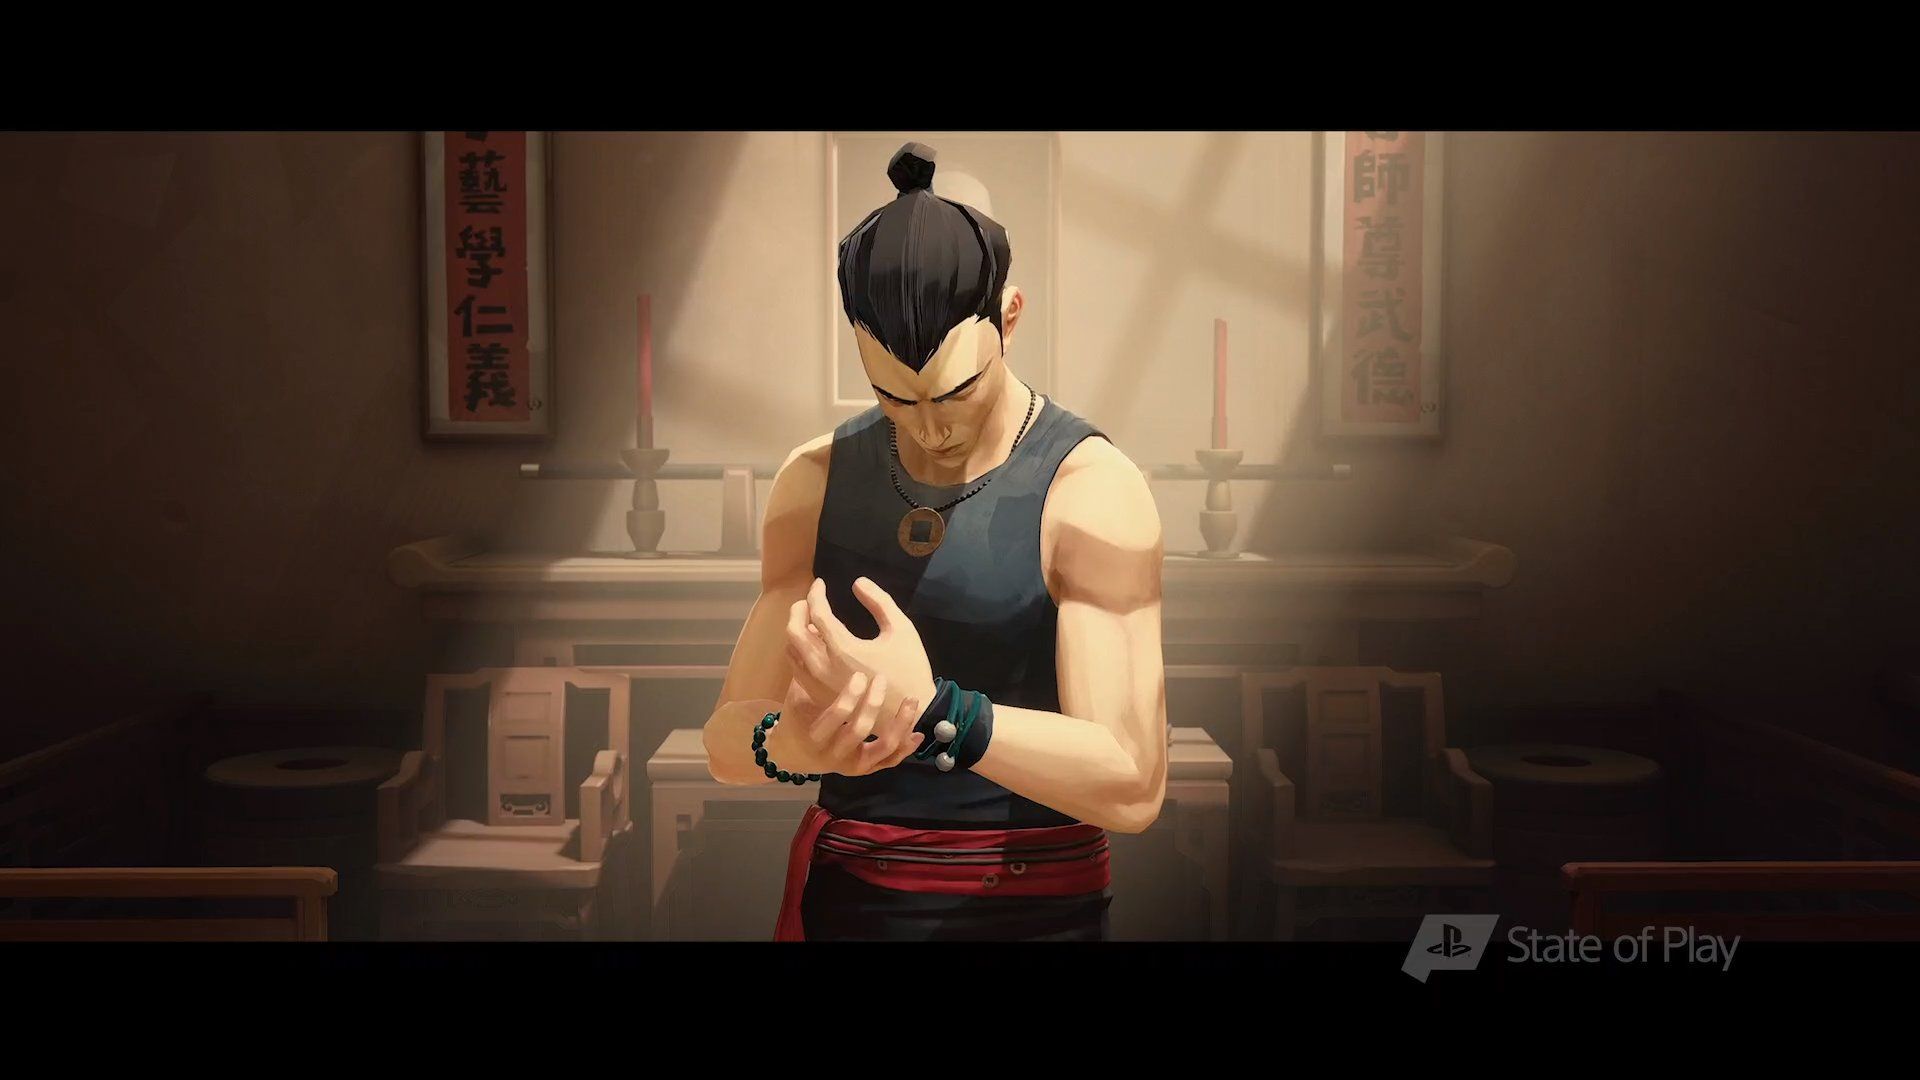 Sifu is a new martial arts game by Sloclap, coming this year